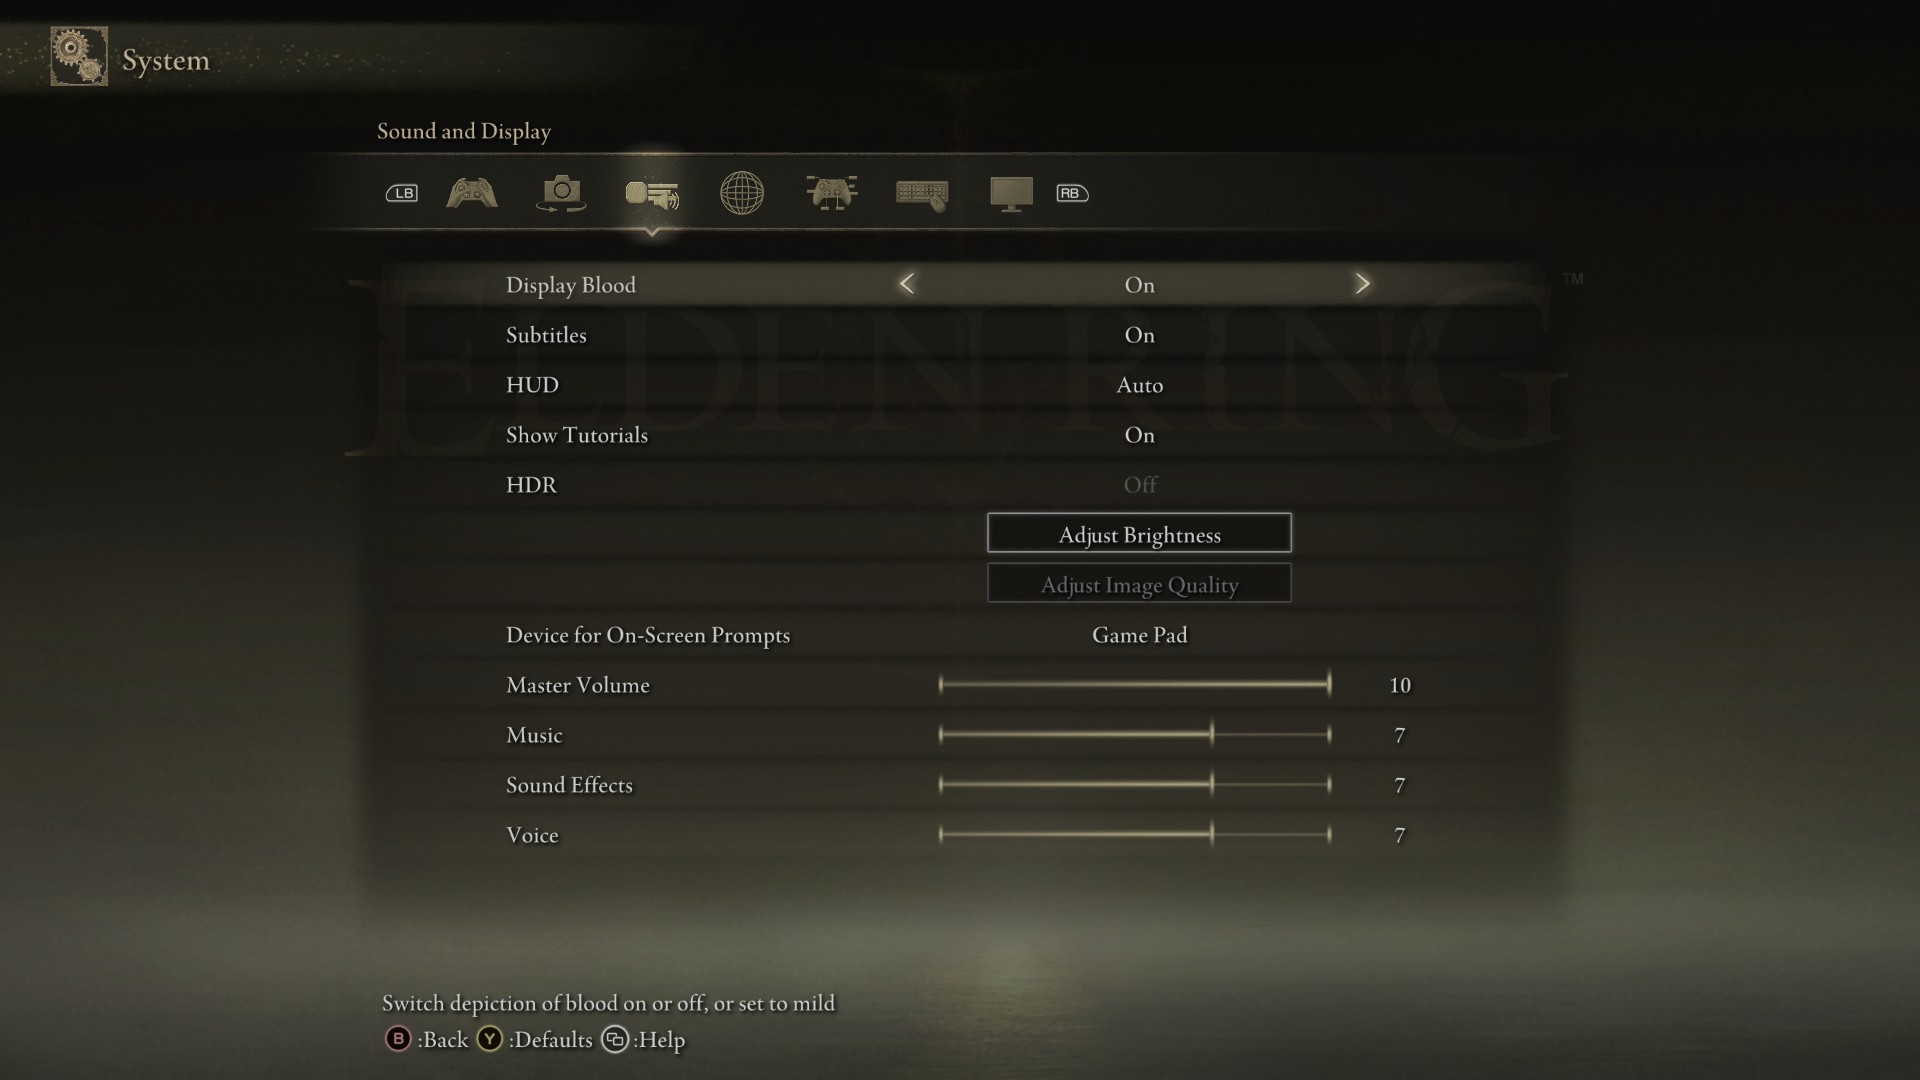 Elden Ring PC Requirements Posted, Then Removed